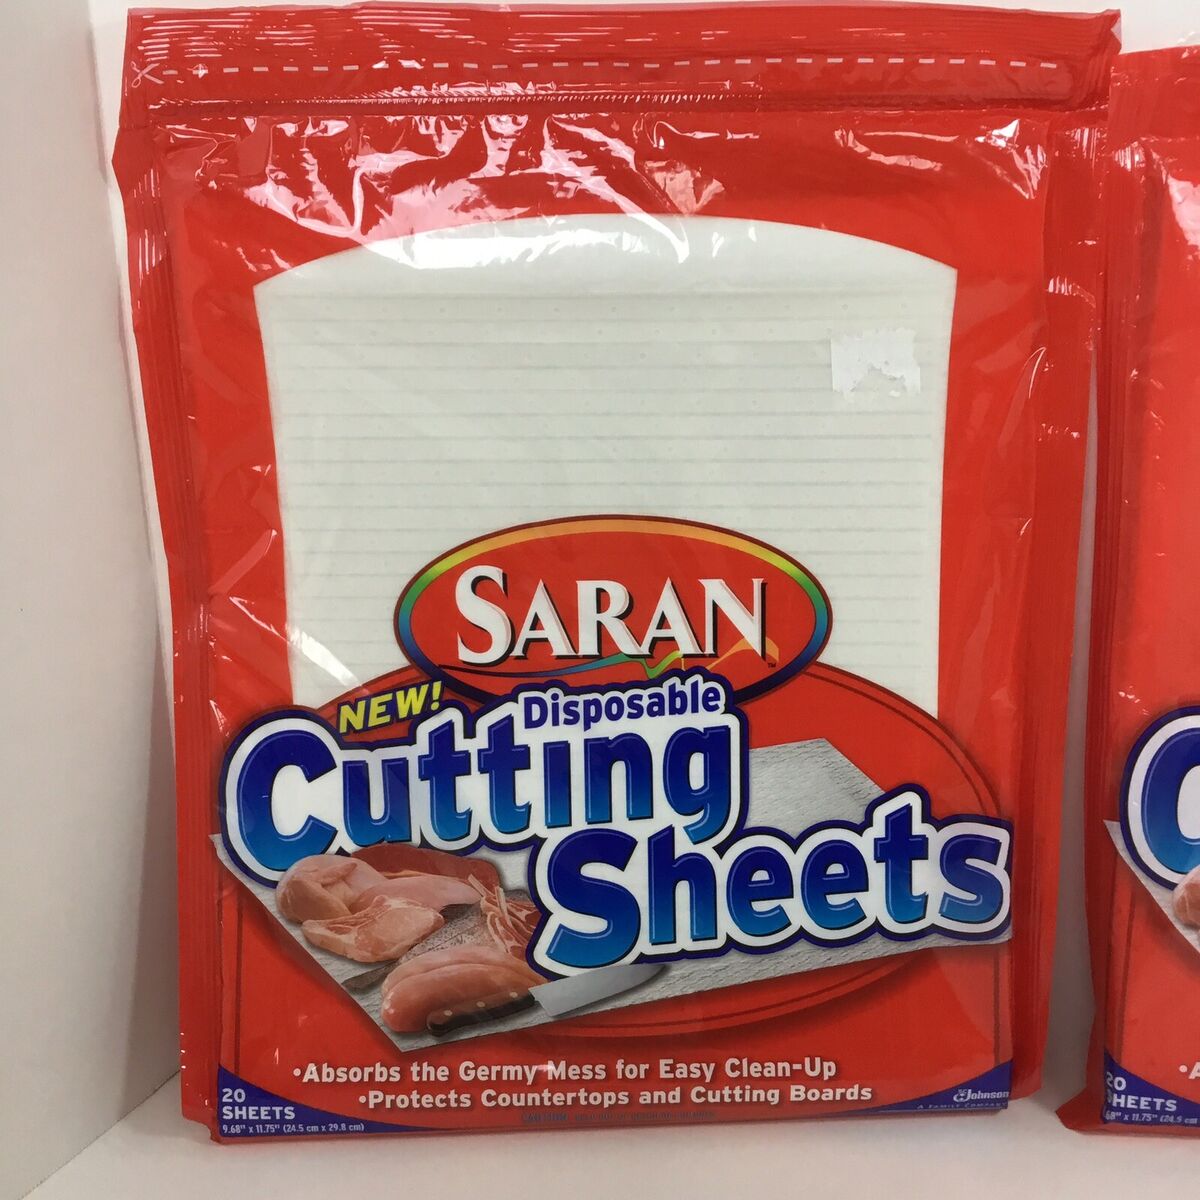 34 Saran Disposable Cutting Board Sheets Pack of 20 + 14 pieces